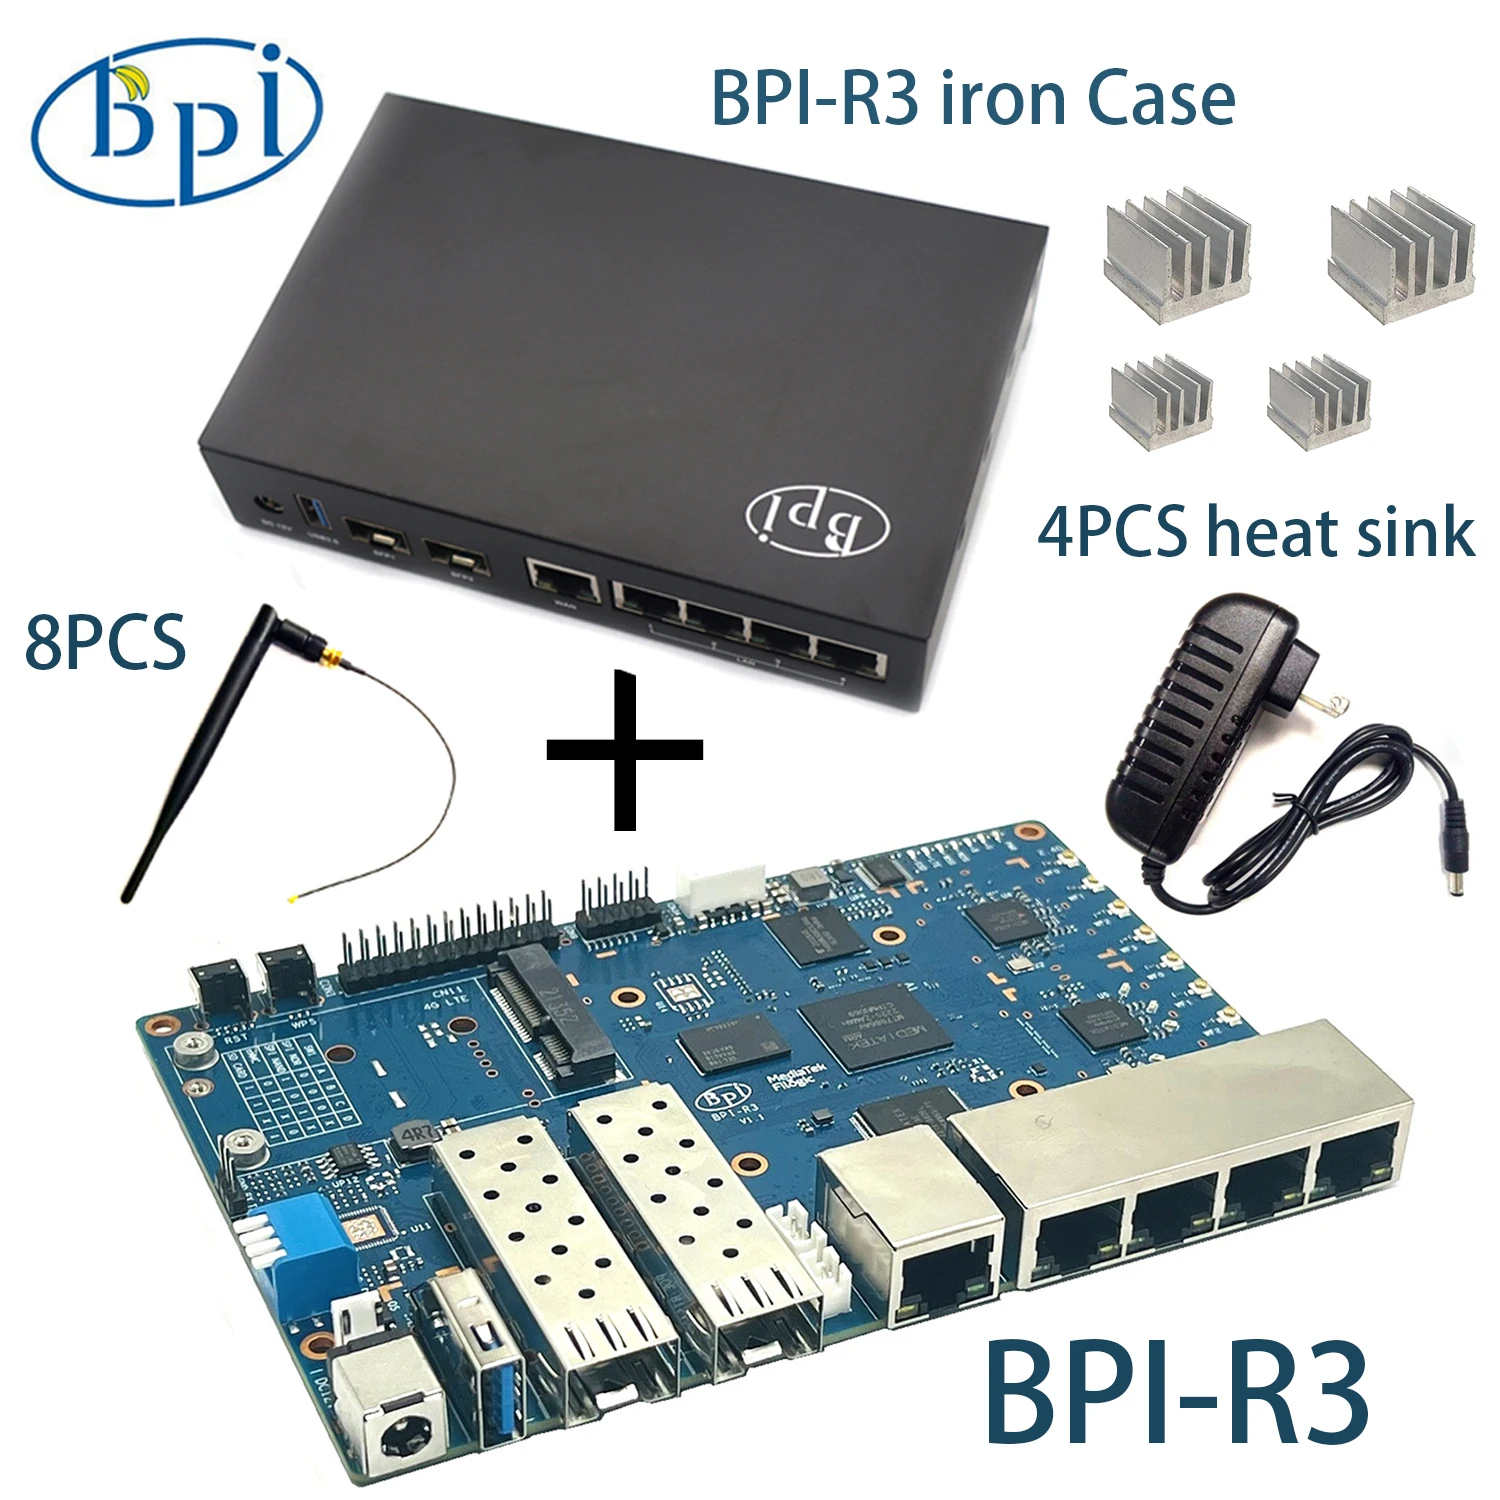 Banana Pi BPI-R3 With Iron Case Power MediaTek MT7986 Quad Core 2G DDR RAM 8G eMMC flash Support Wi-Fi 6 2.4G Router Board